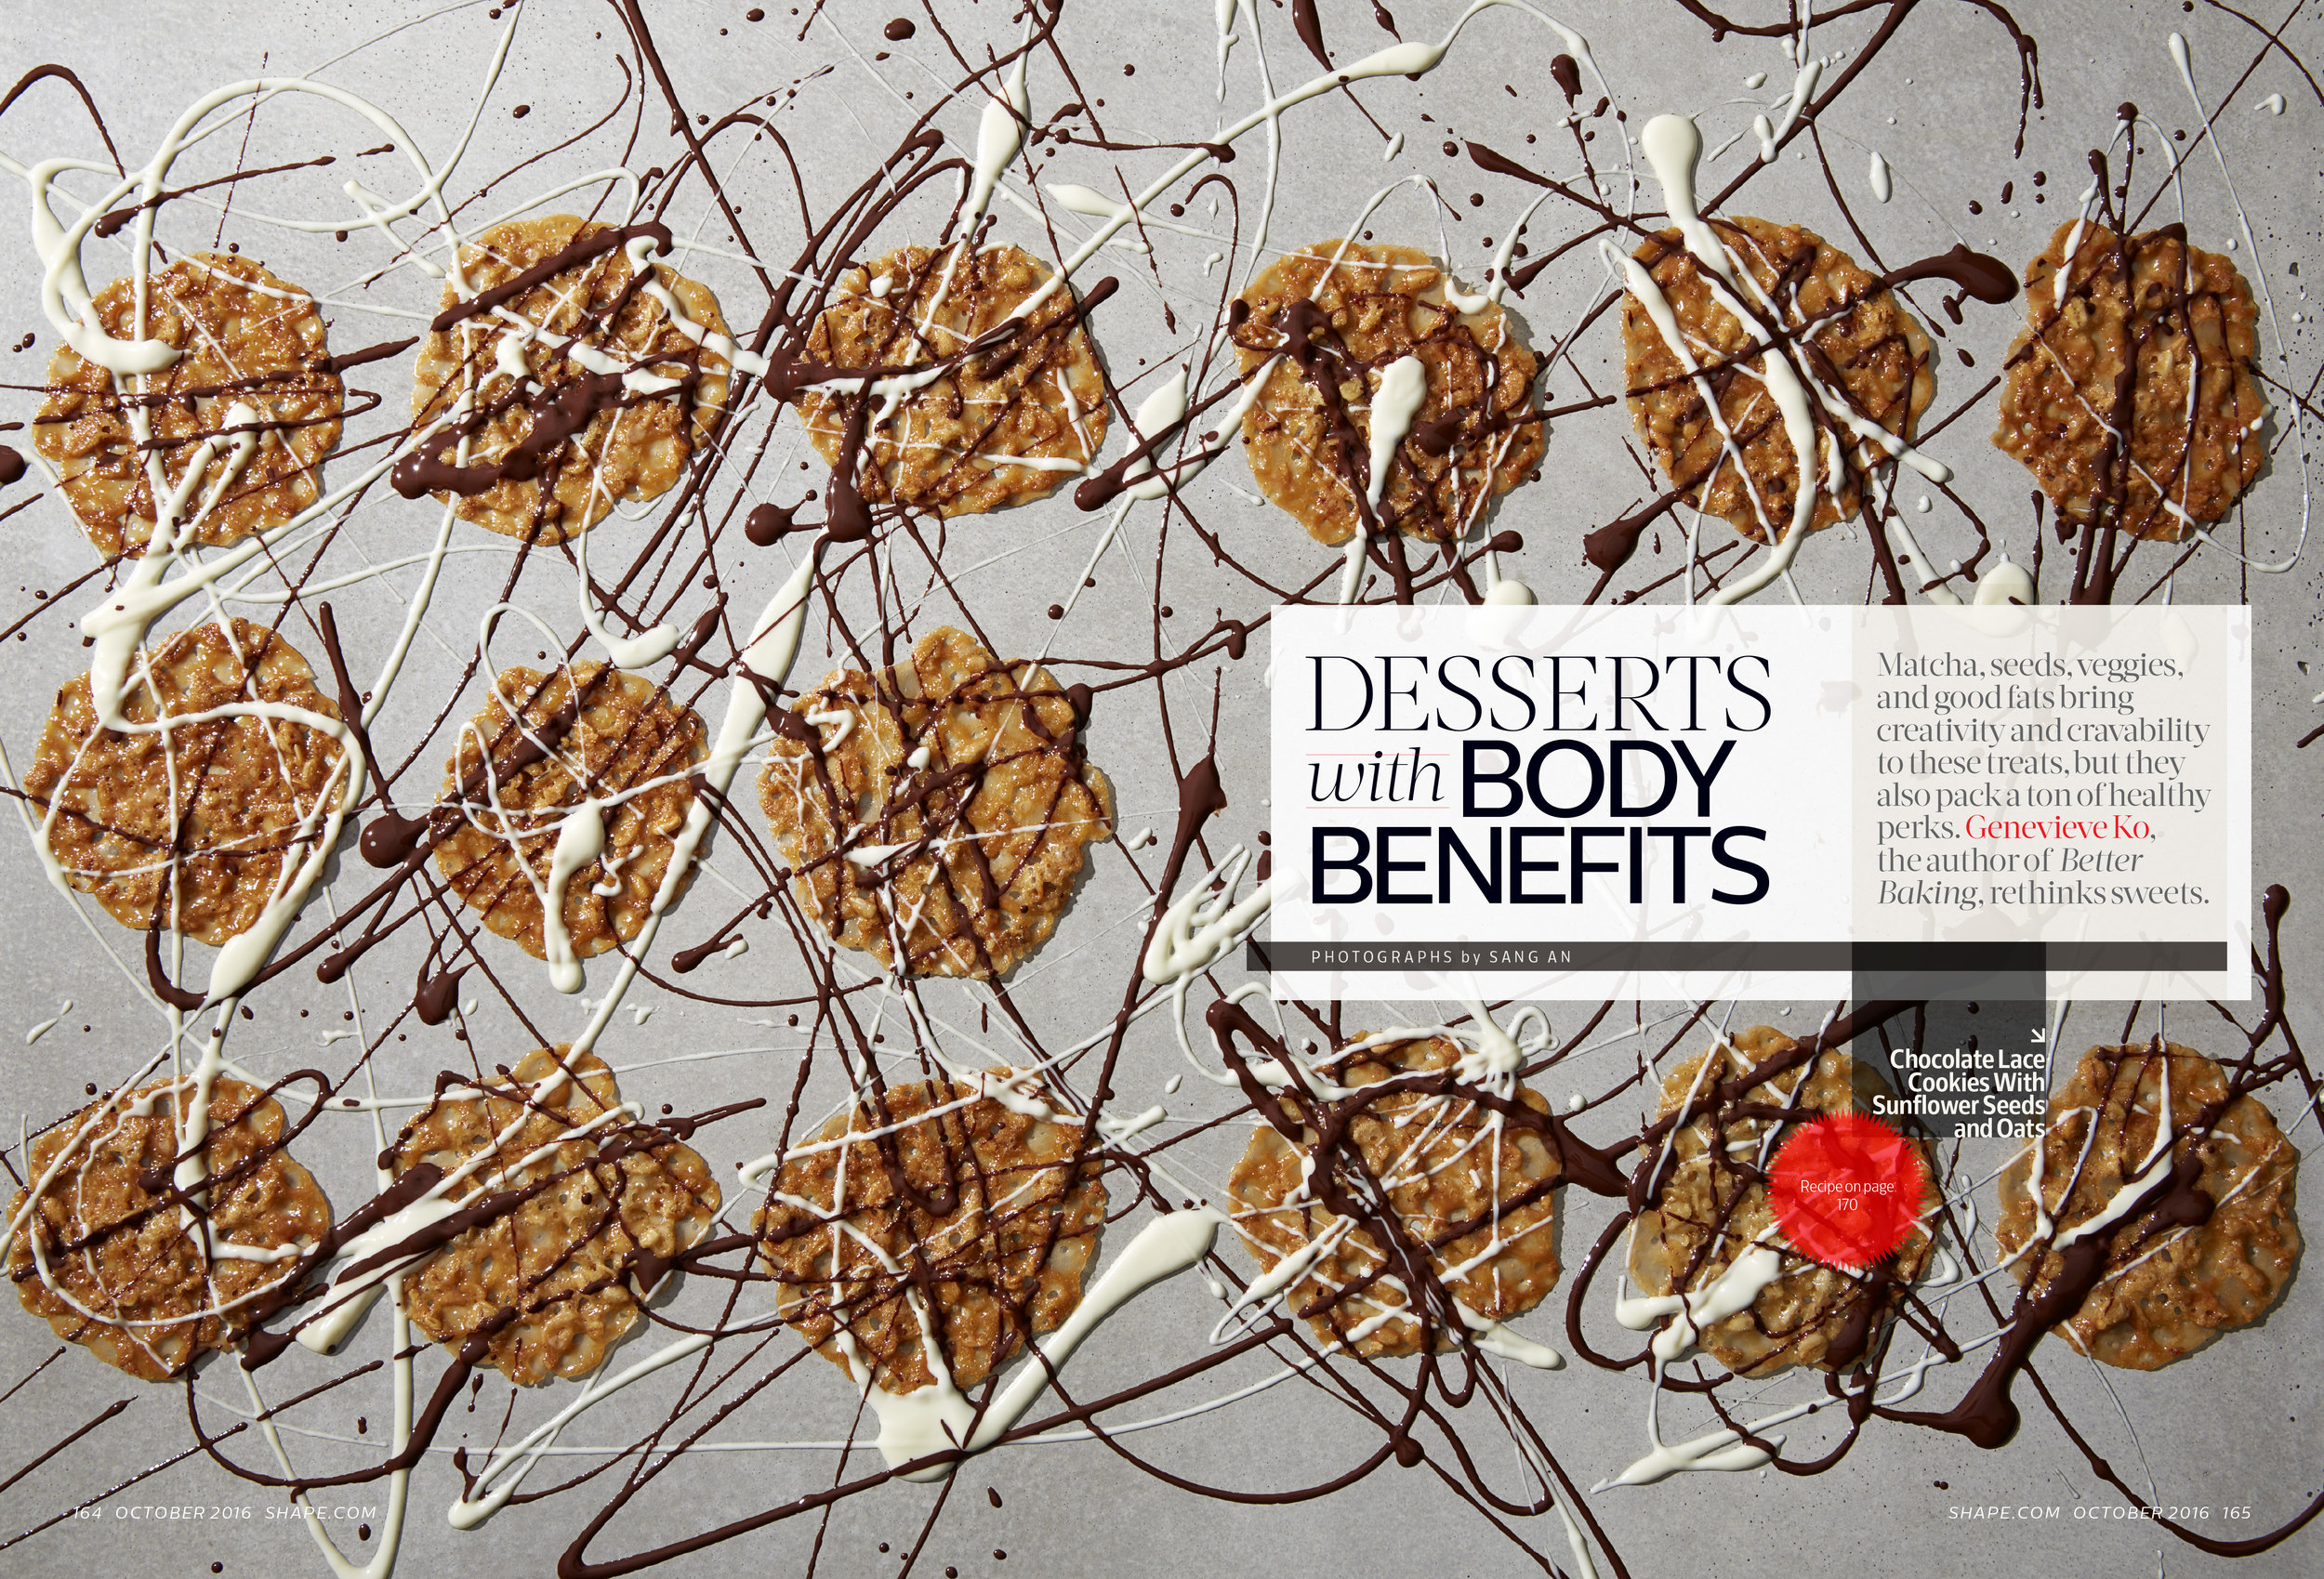 Desserts With Body Benefits, October 2016